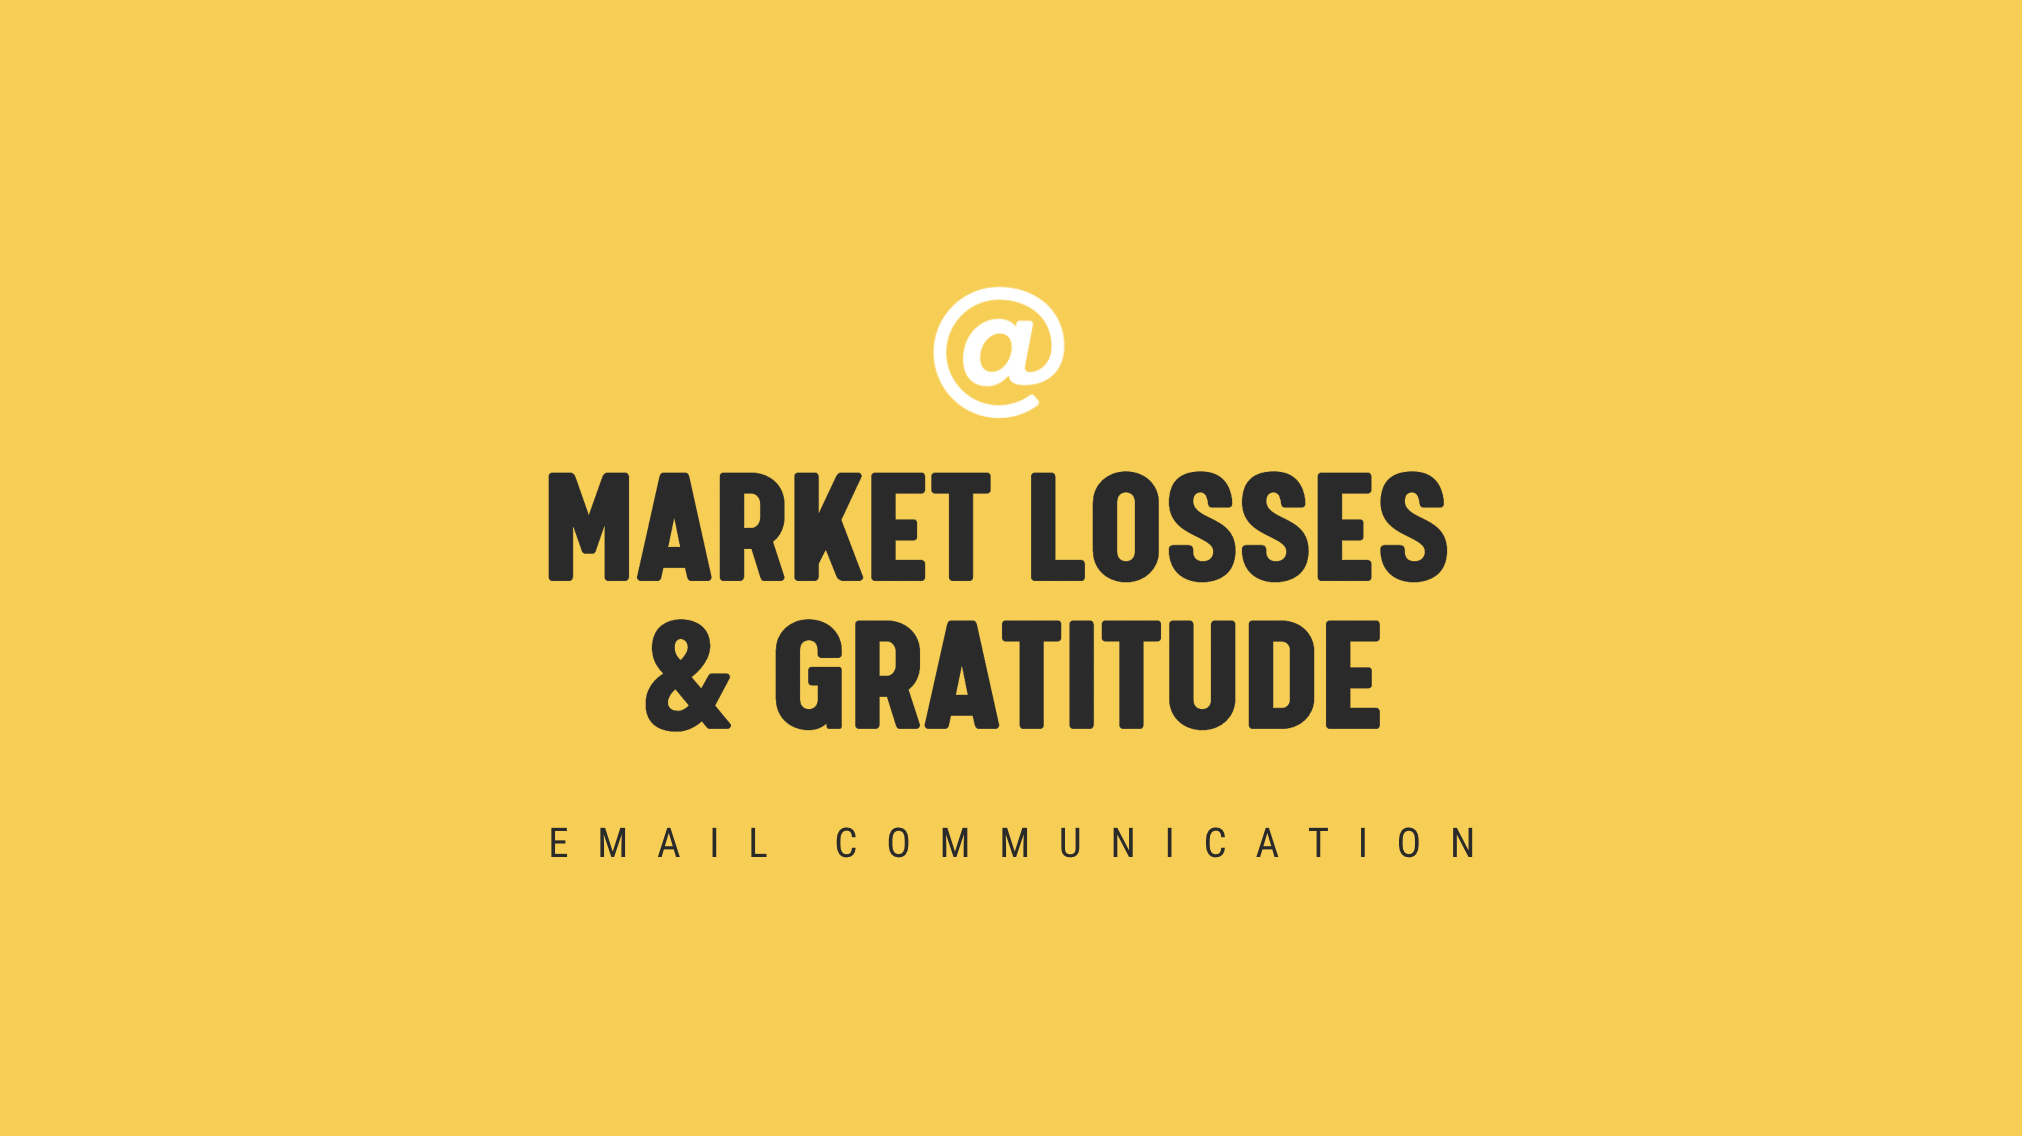 [NEW] Market Losses & Gratitude - Timely Email